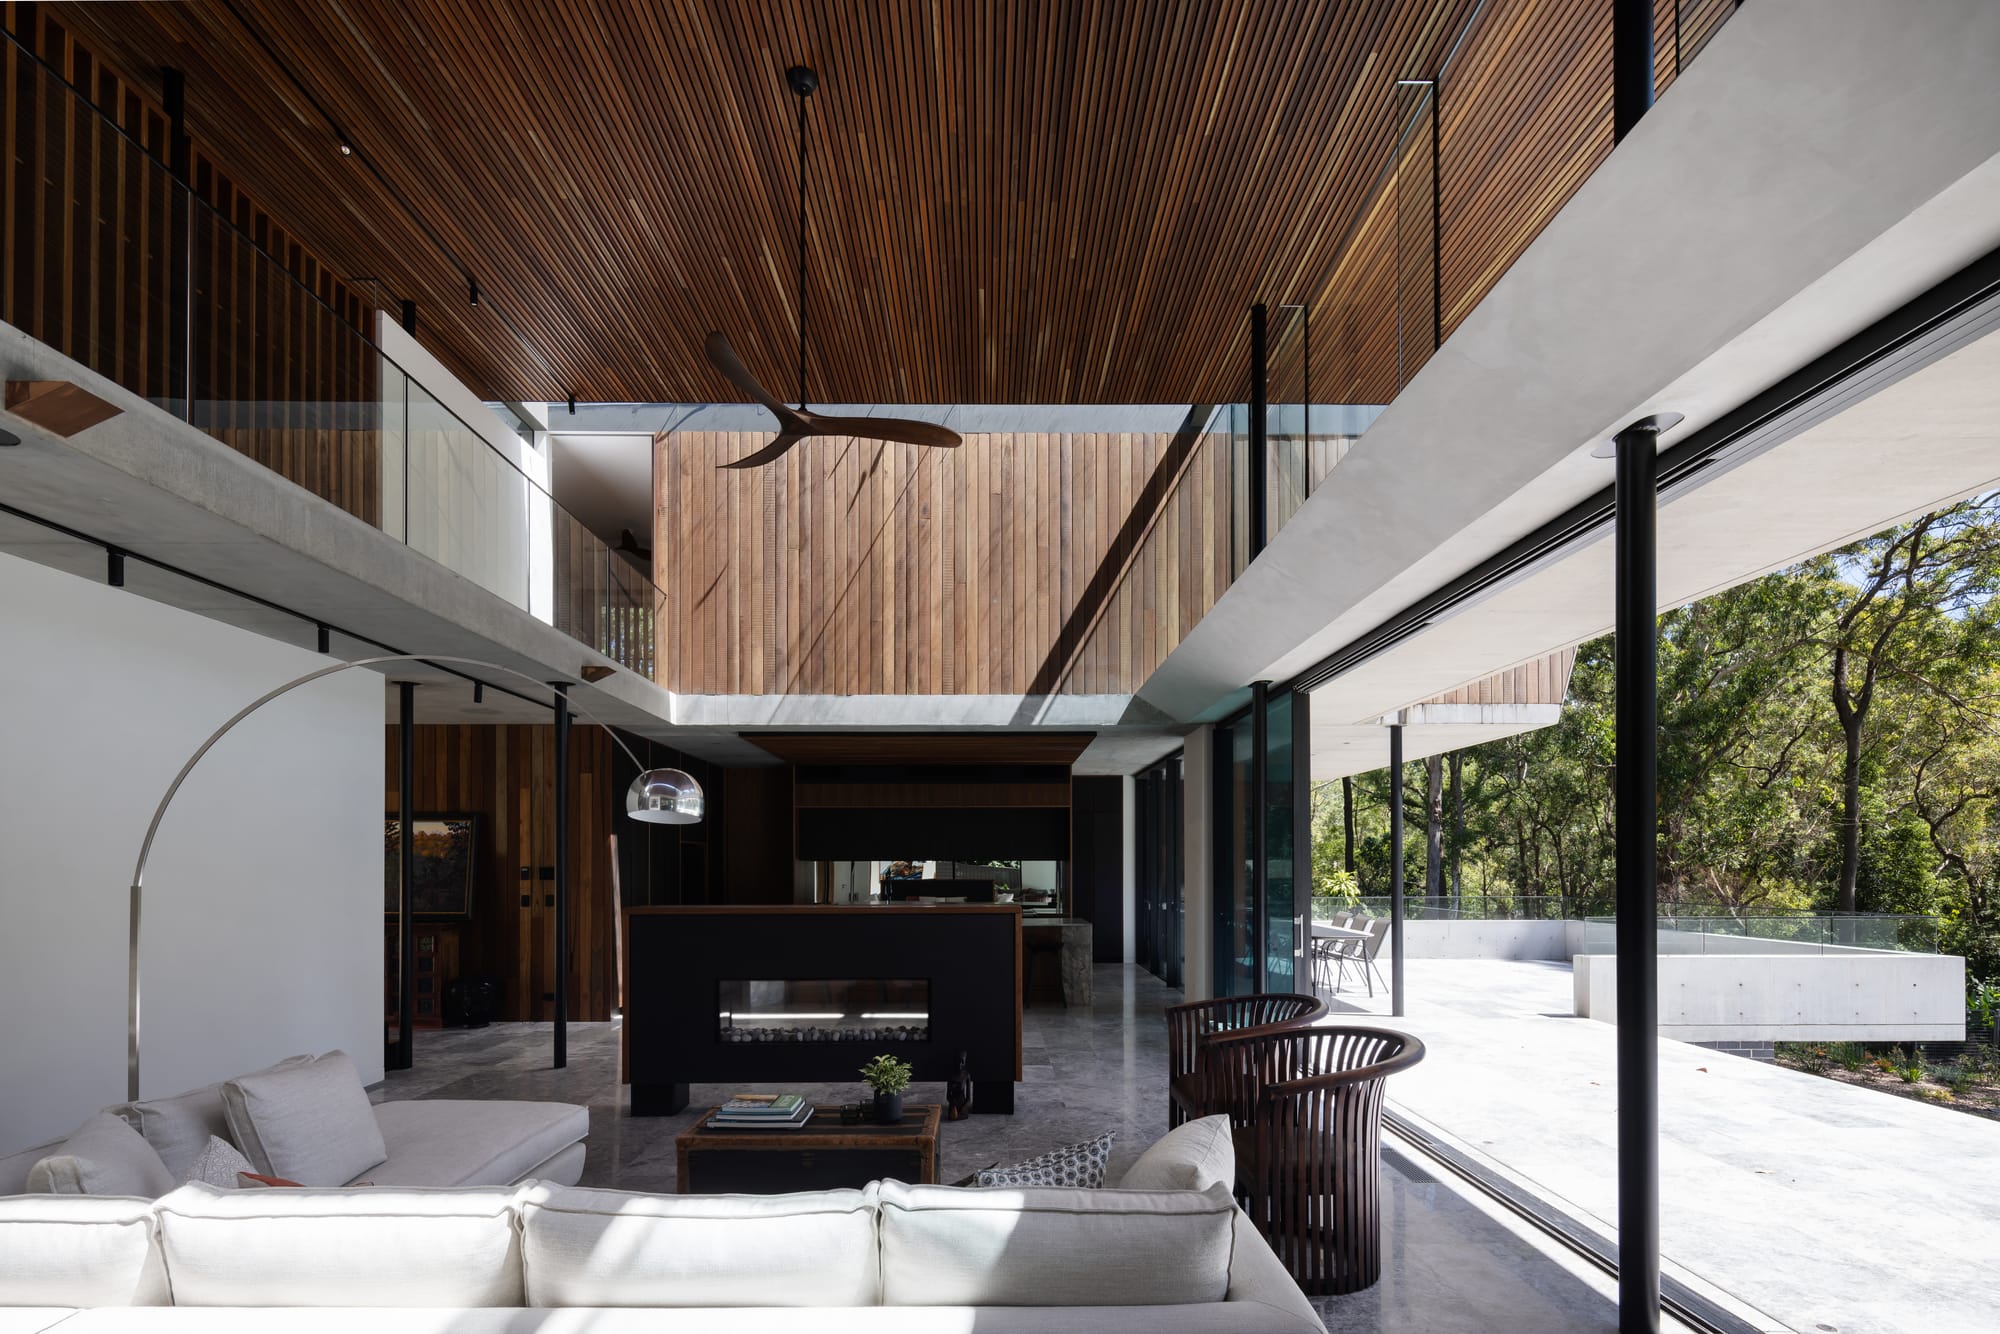 Mortlock Timbers Series: Fox Valley House. Photography by Simon Whitbread. Double height interior living space with floor-to-ceiling windows overlooking patio. Timber clad ceiling and walls. Overhead walkway. 